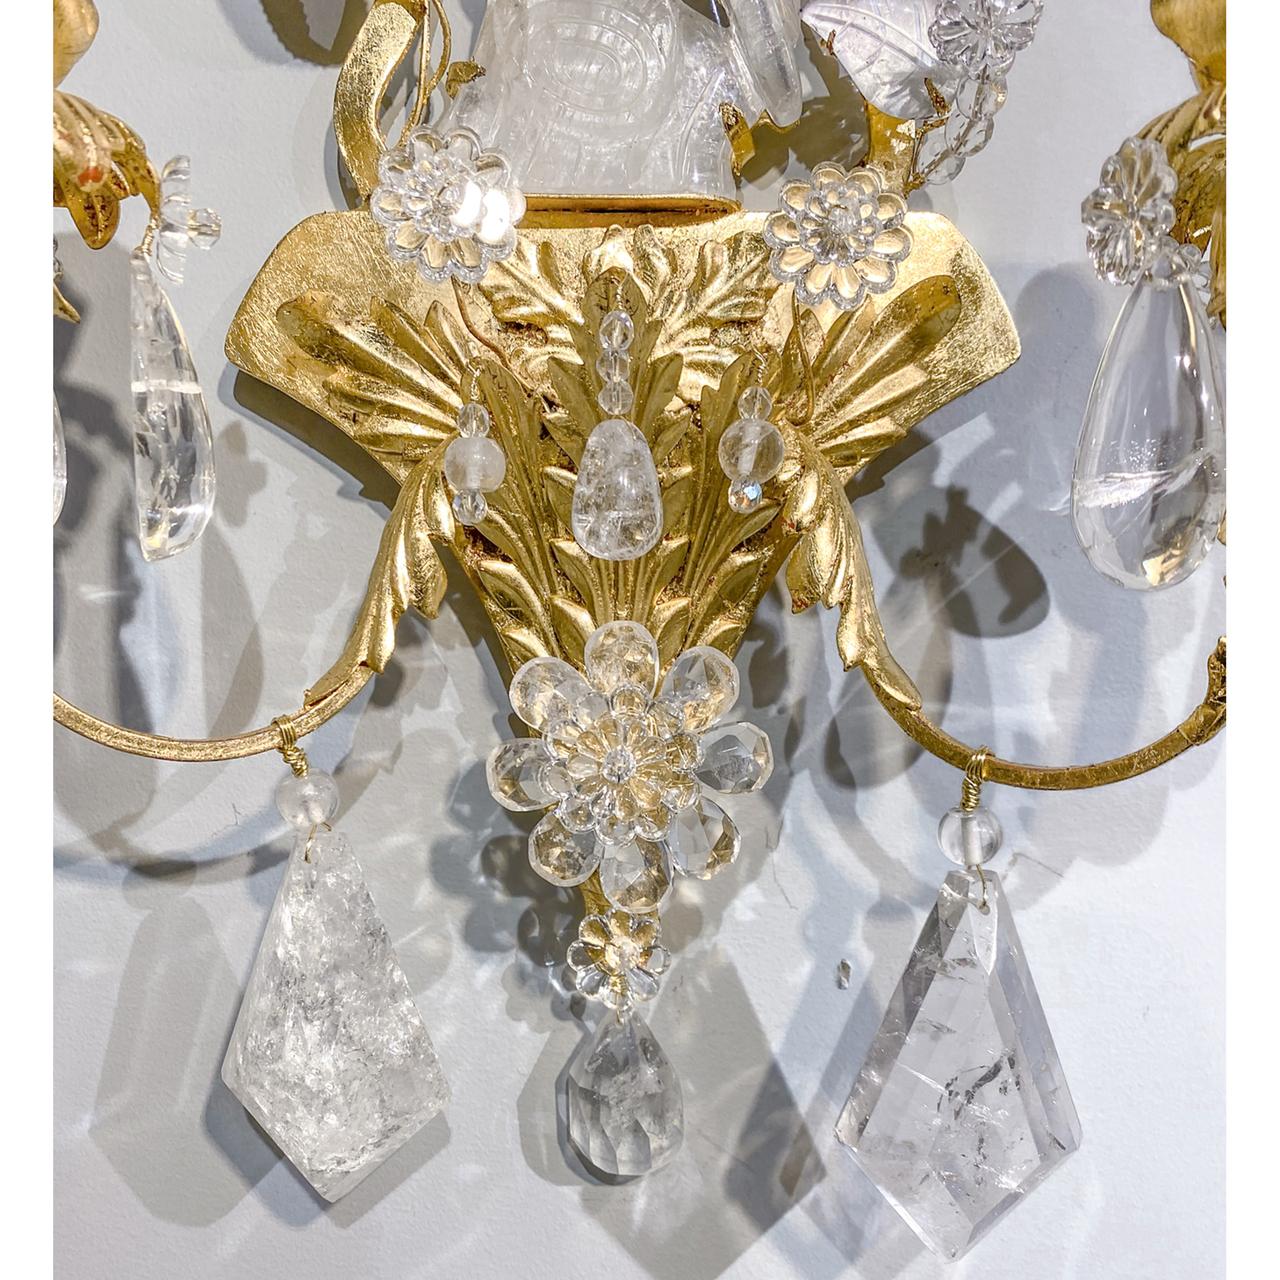 A fine pair of rock crystal sconces with an exquisitely carved rock crystal parrot in the center of both sconces. The parrot is perched on a log with a gorgeous assortment of crystal leaves and flowers surround the it. Two flowers with individual